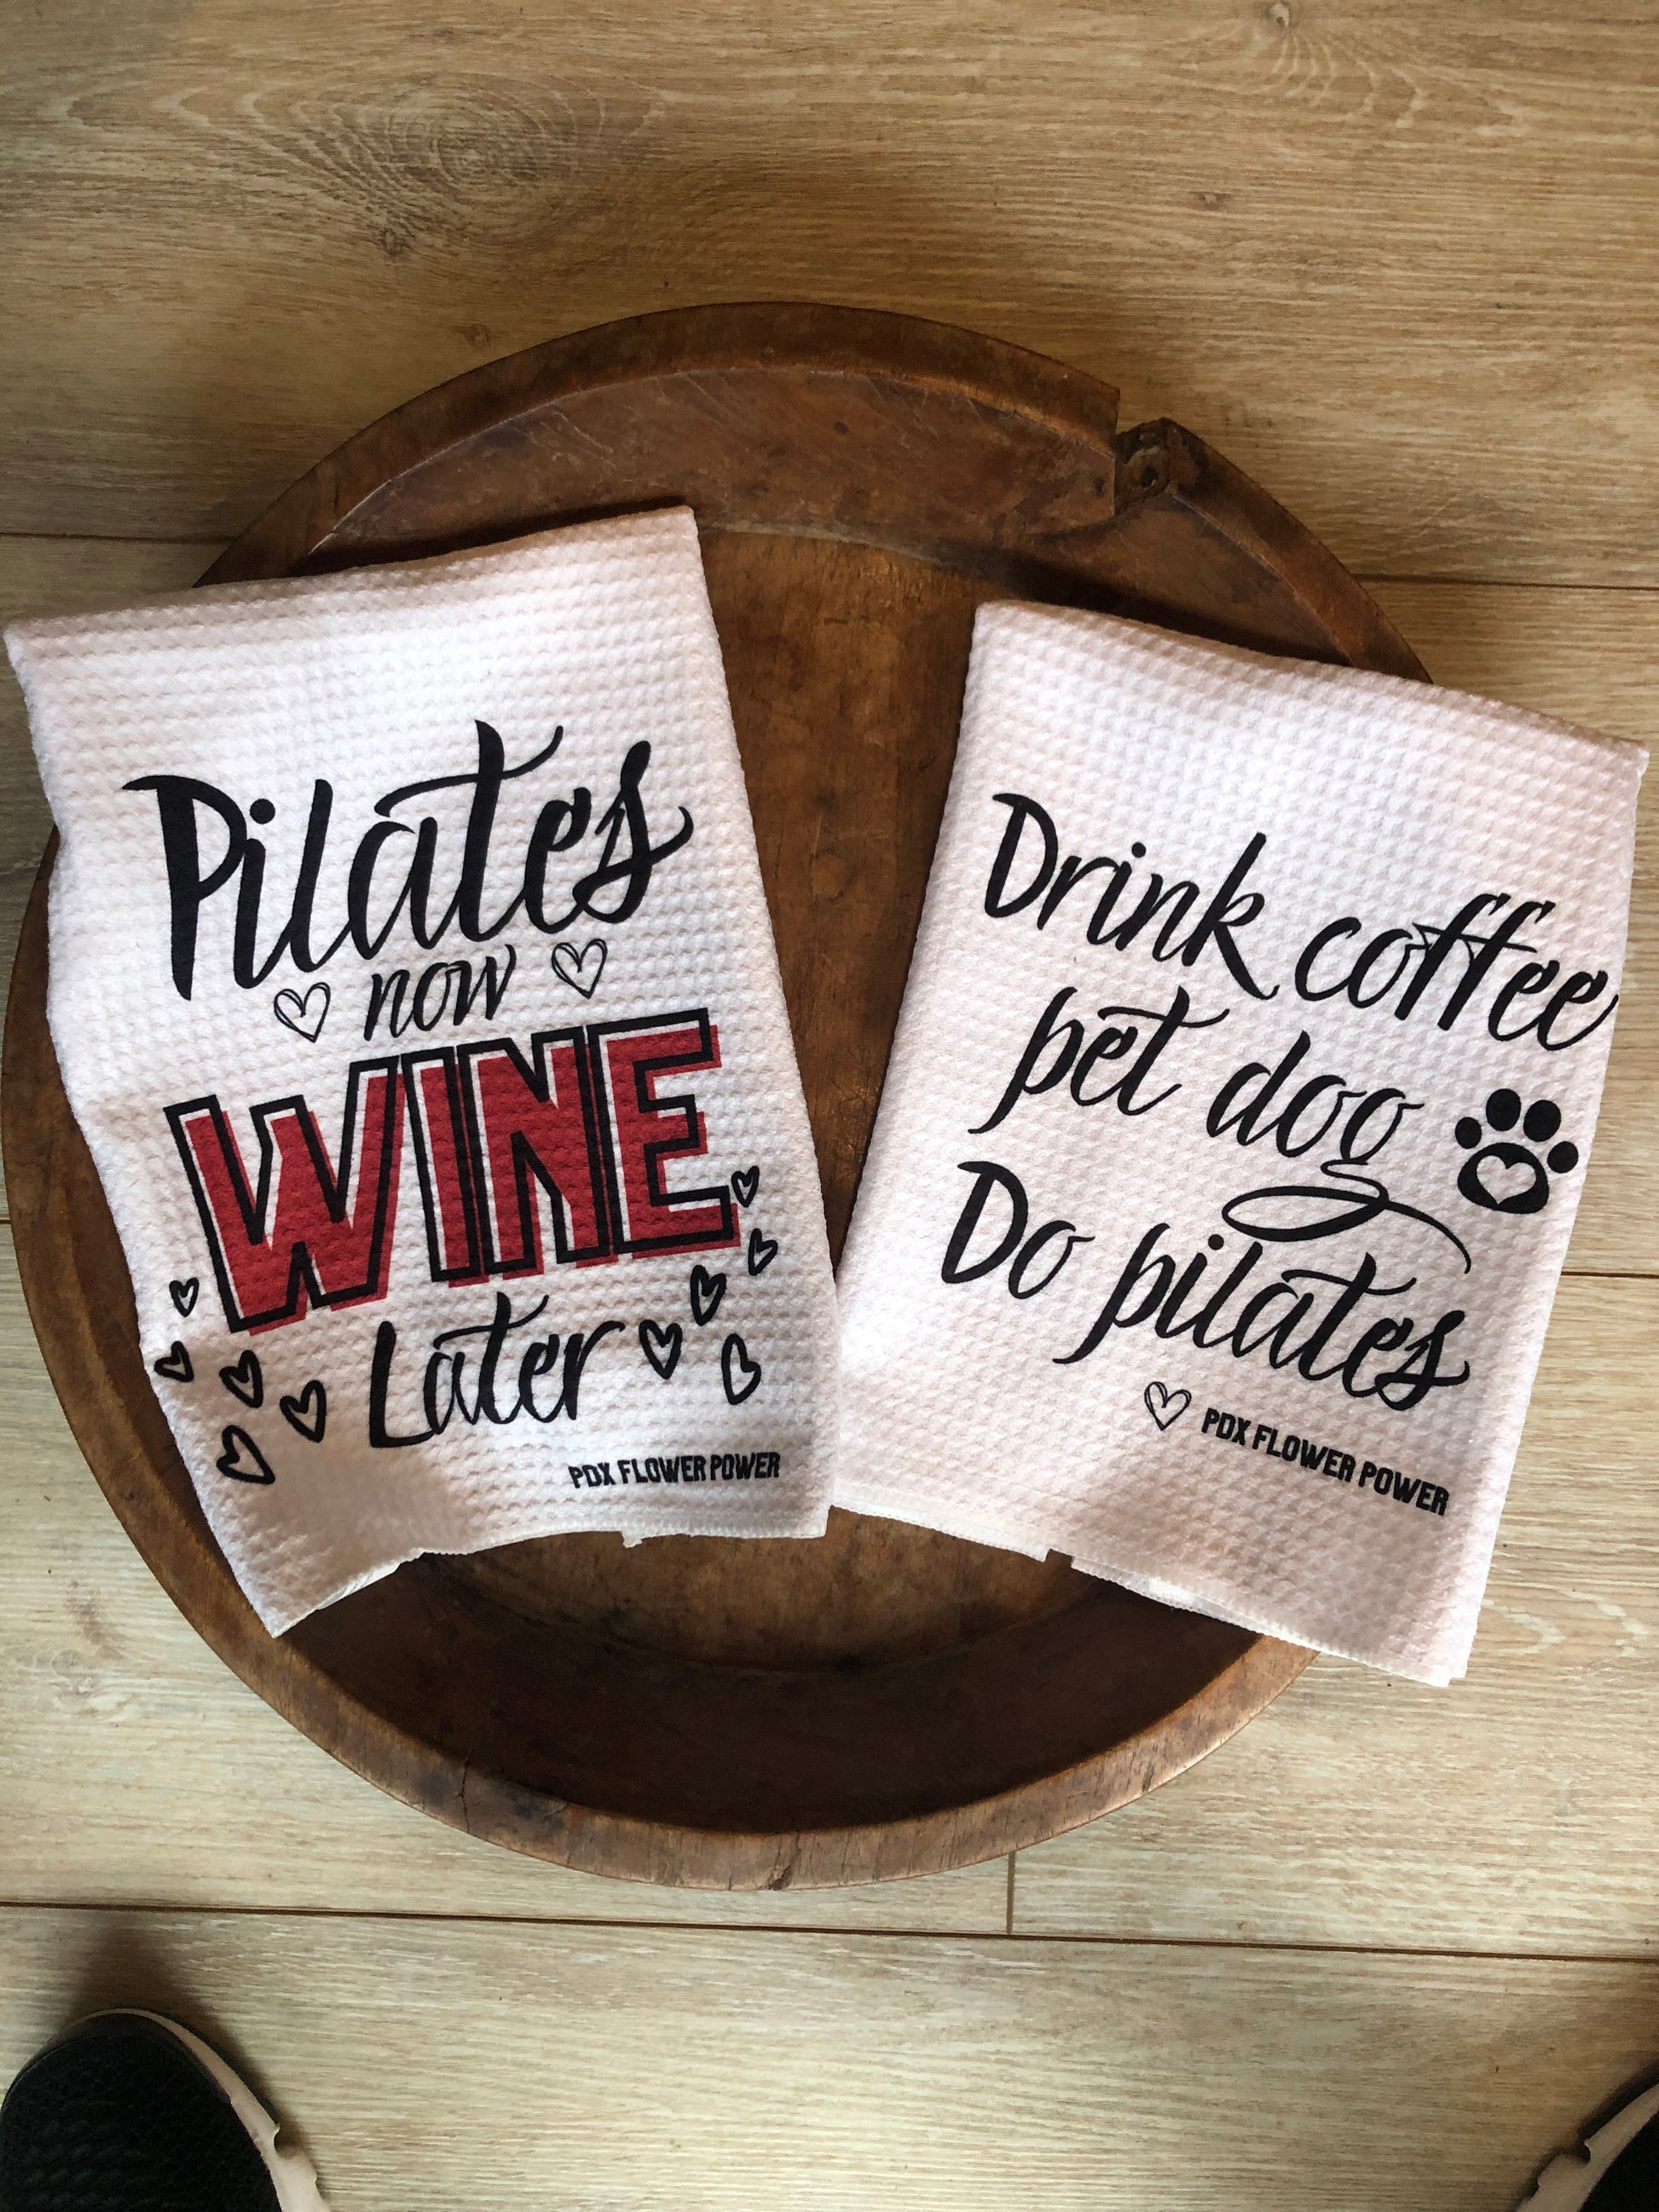 Pilates Gift set Pilates now Wine later and Dink coffee pet dog do – PDX  Flower Power